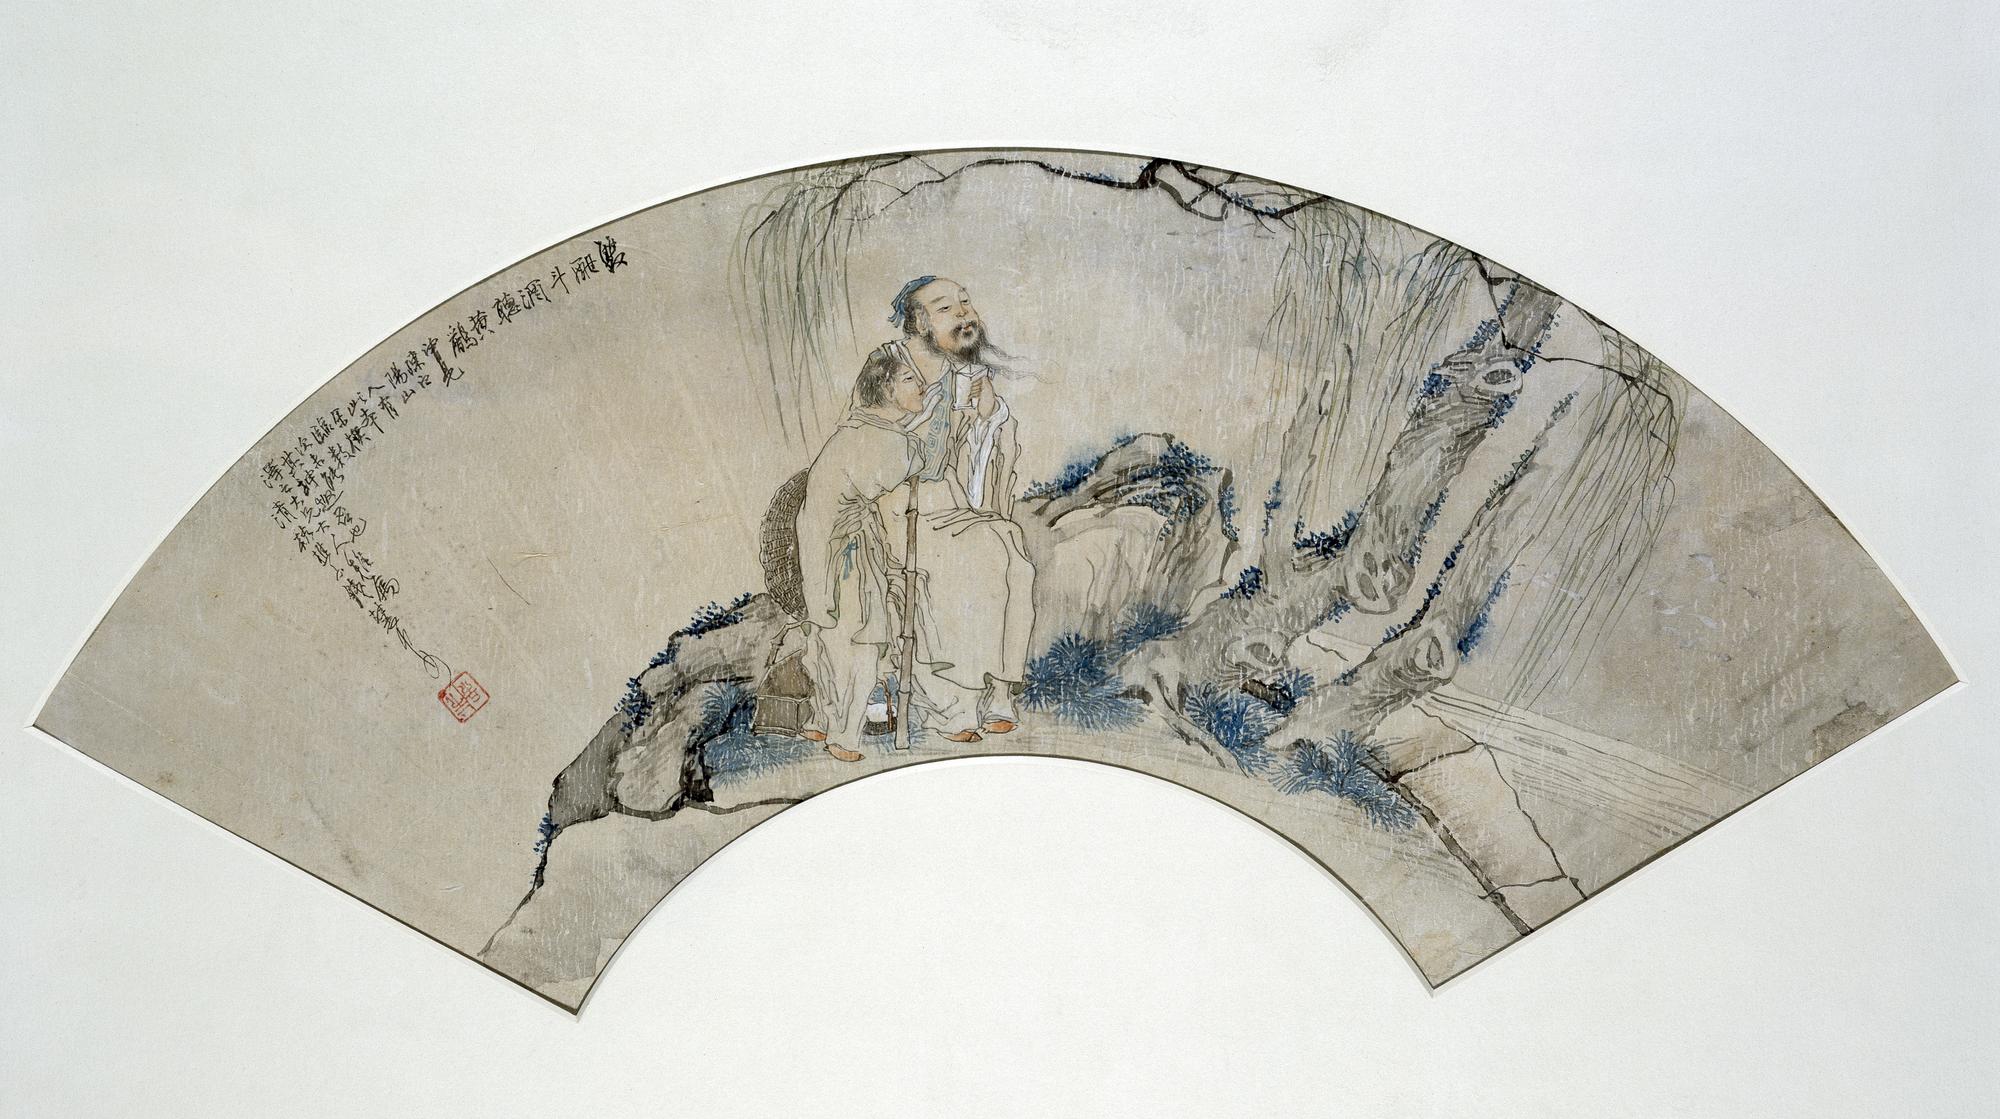 Fan painting of an elder and his attendant under a willow tree, ink and colour on paper: China, by Qian Huian. Collected by Sir James Stewart Lockhart. With permission of George Watson's College.